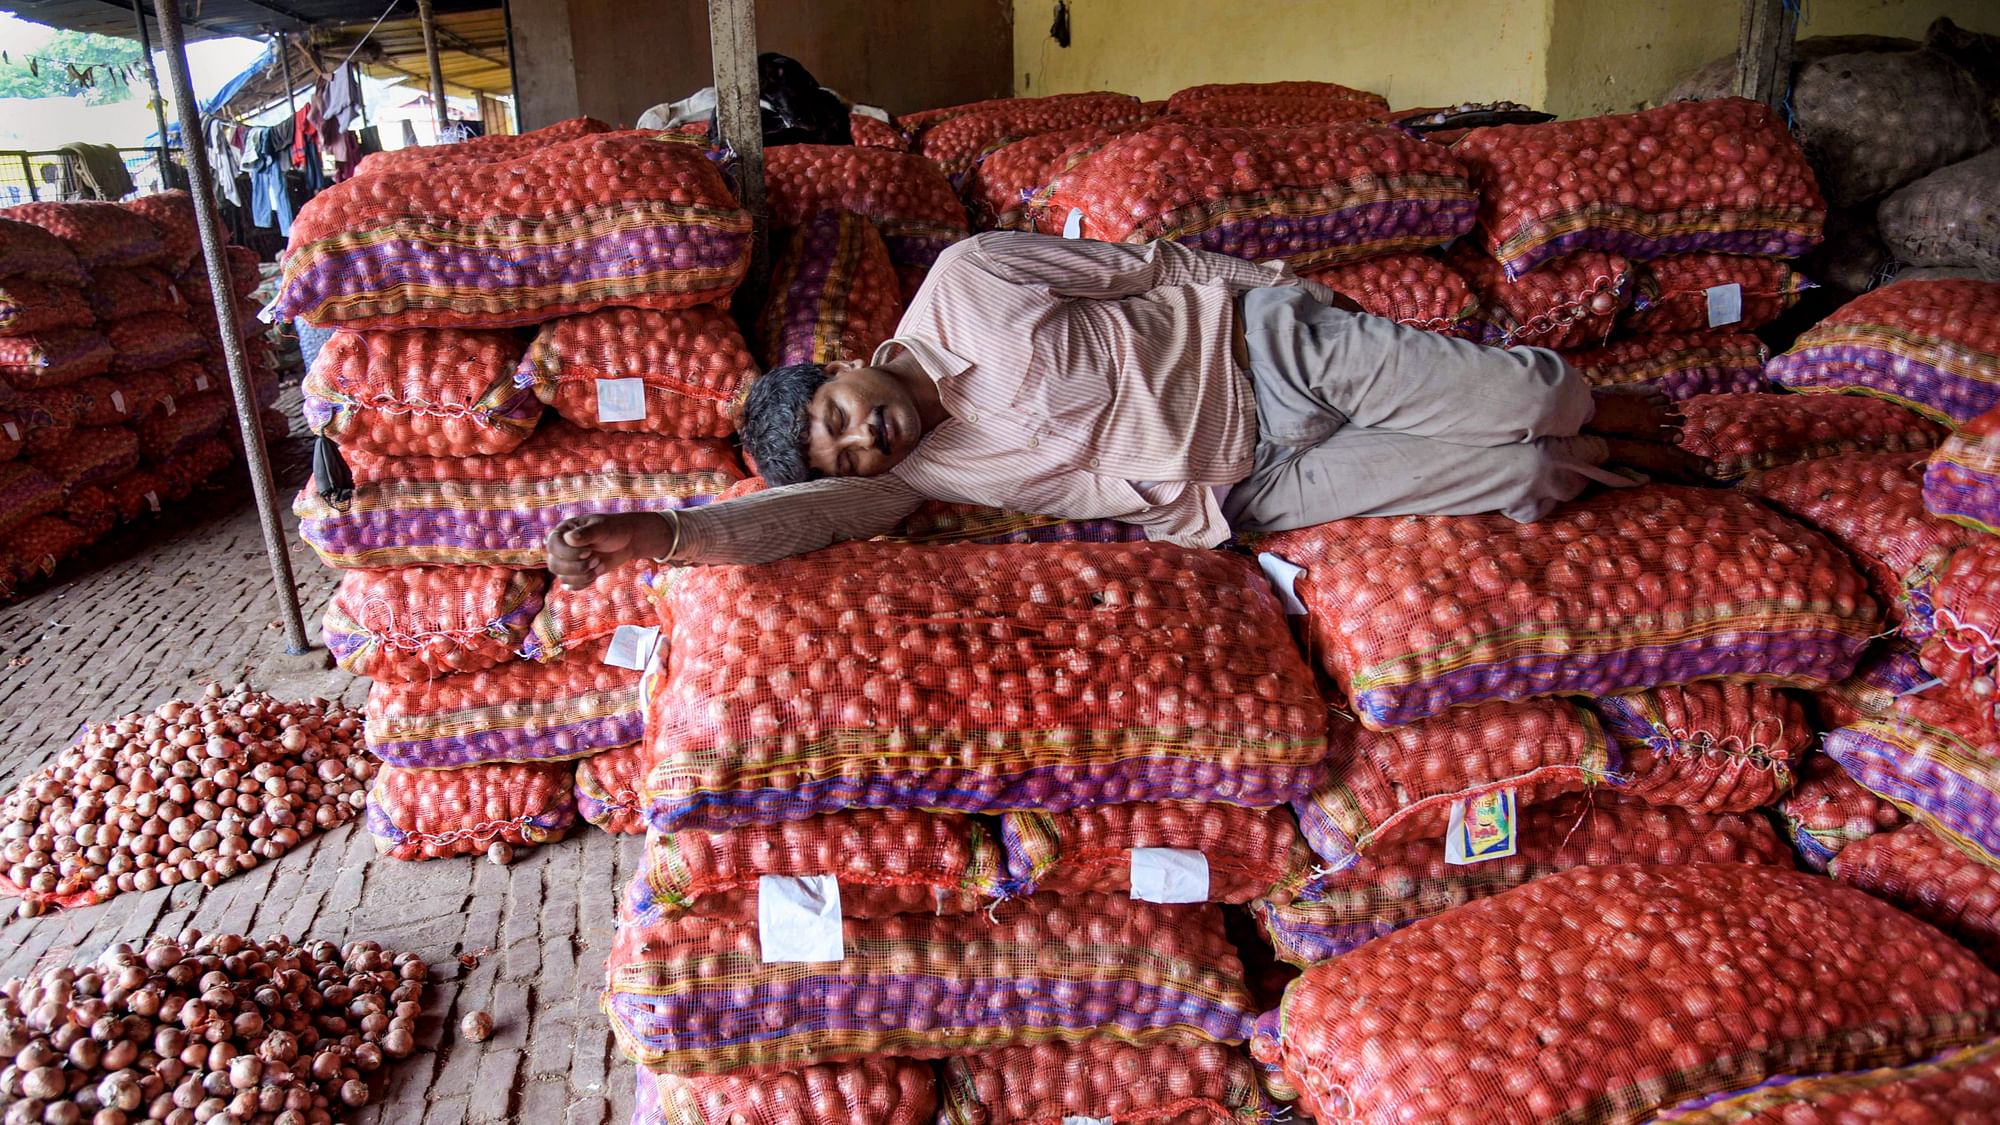 A labourer rests on sacks of onions at a wholesale market in Prayagraj.